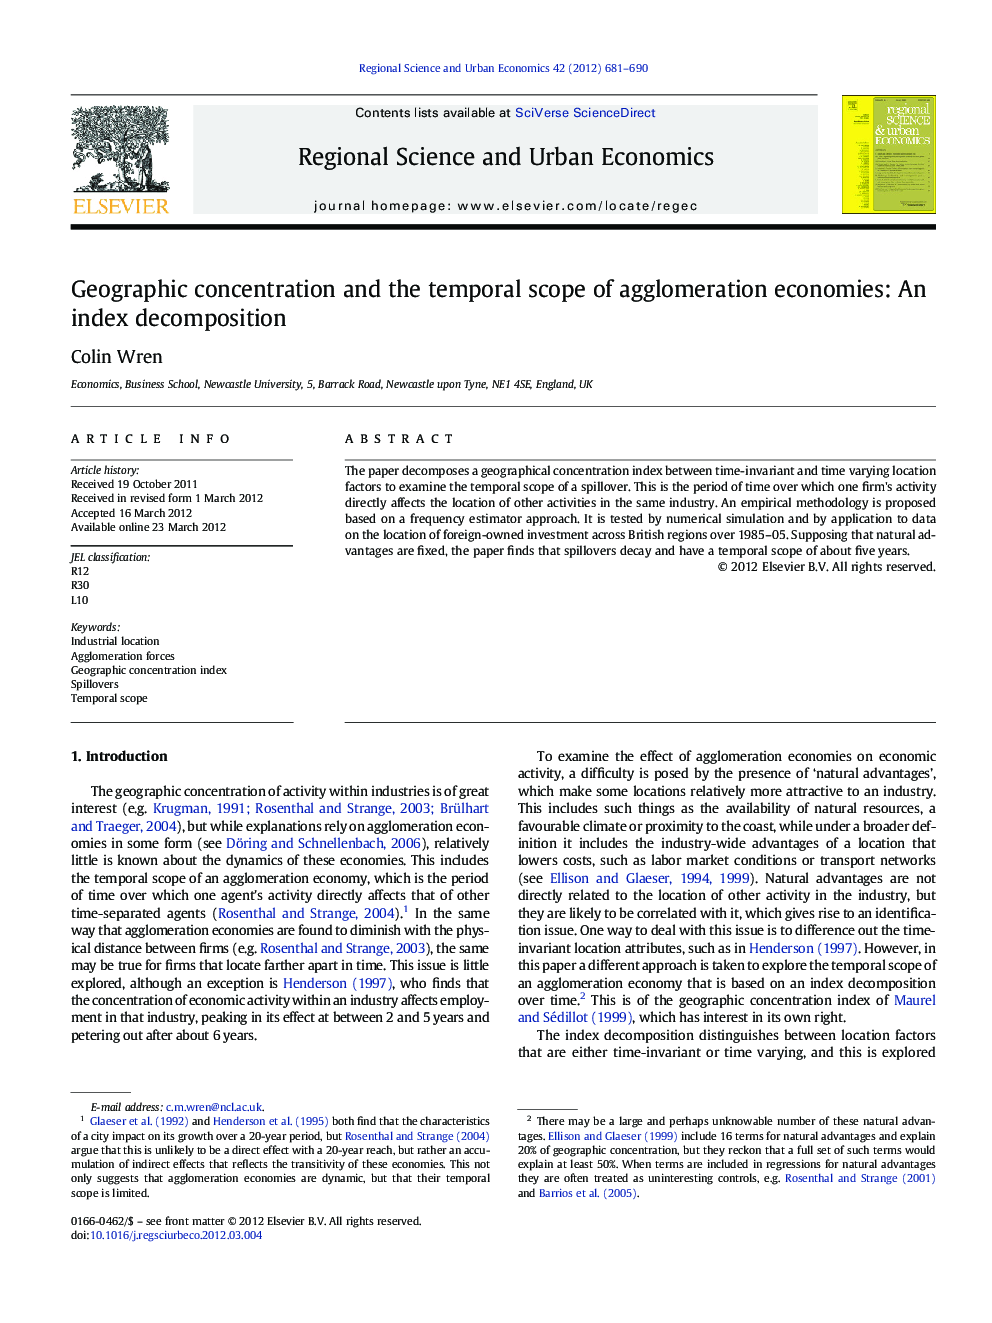 Geographic concentration and the temporal scope of agglomeration economies: An index decomposition